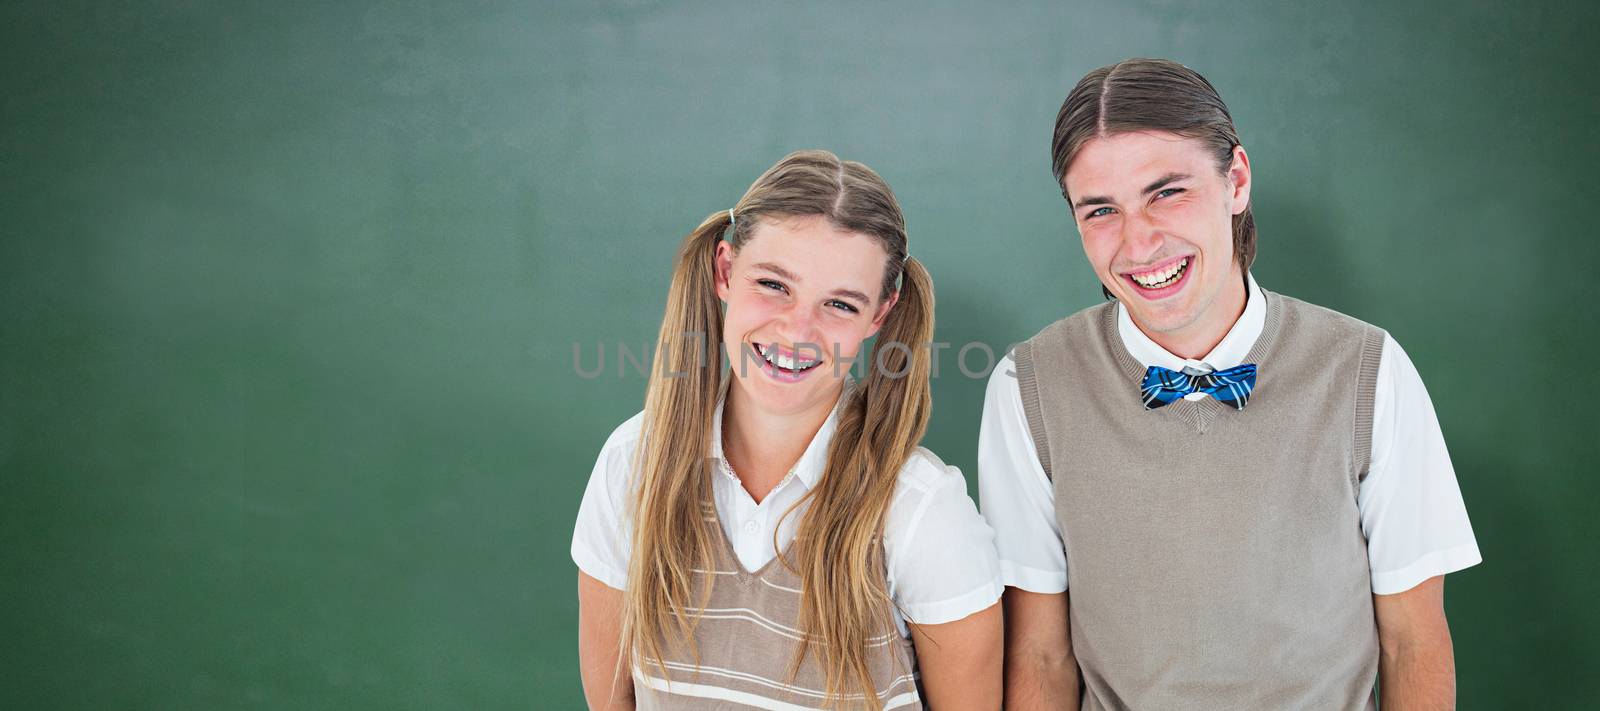 Smiling geeky hipsters looking at camera  against green chalkboard